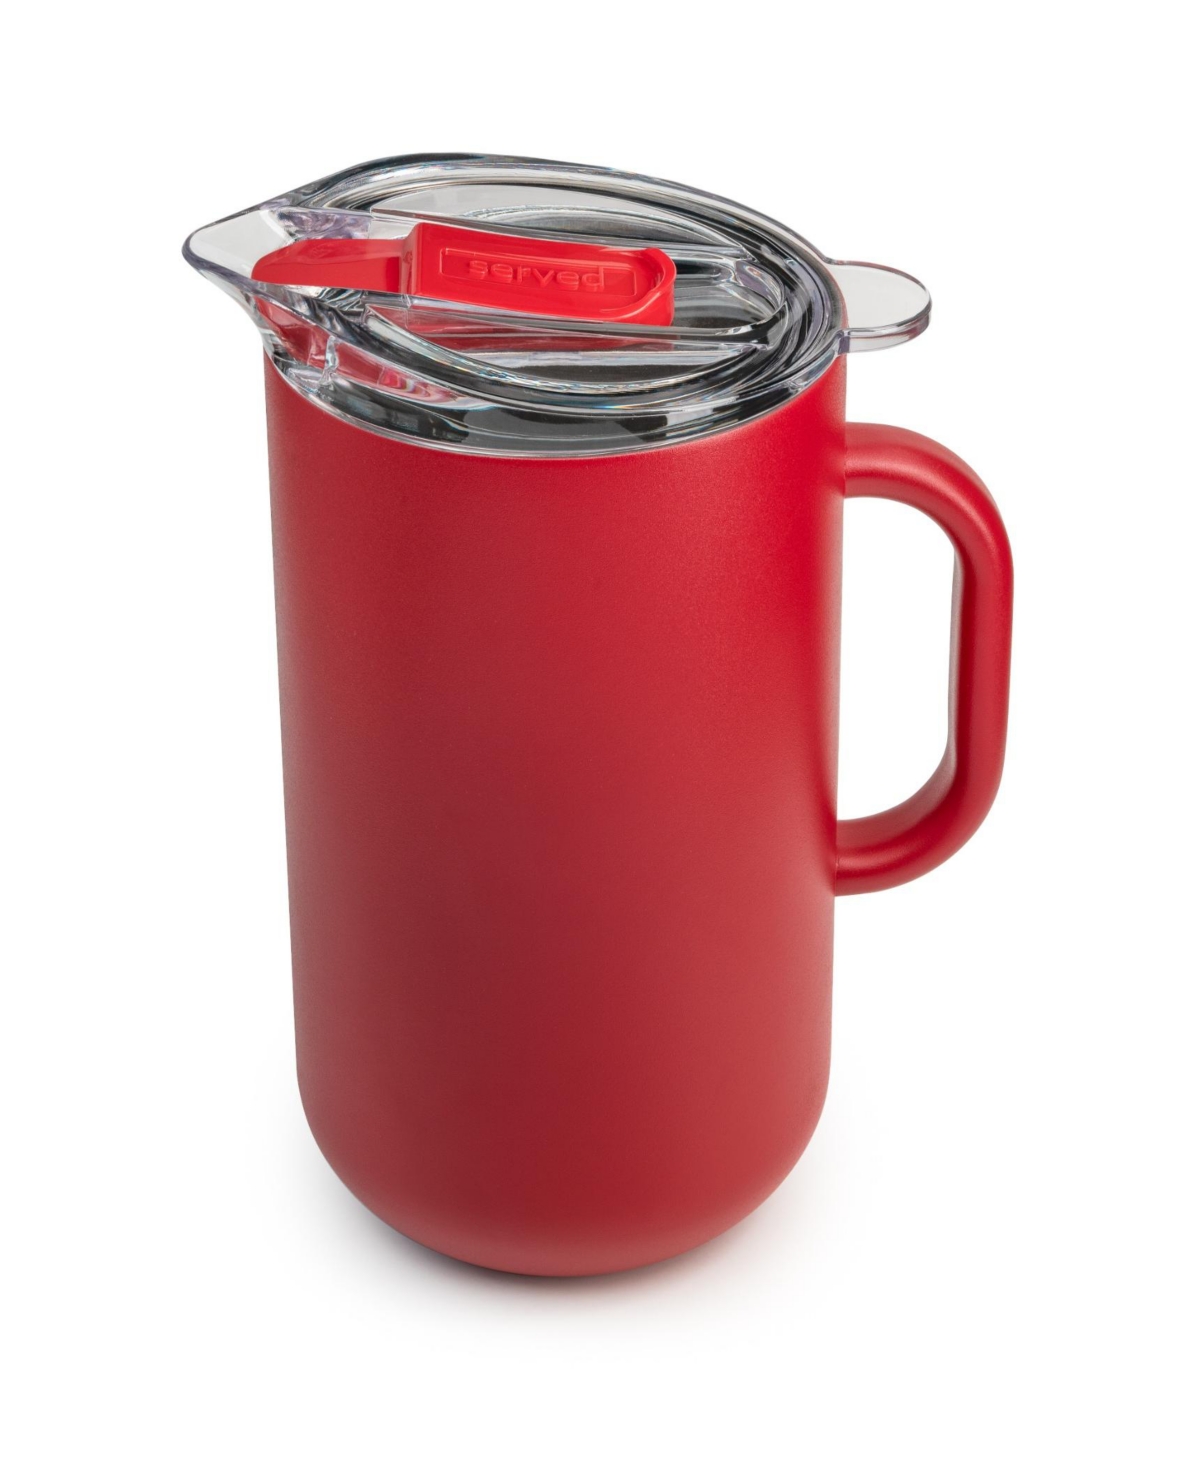 Served Vacuum-insulated Double-walled Copper-lined Stainless Steel Pitcher, 2 Liter In Strawberry